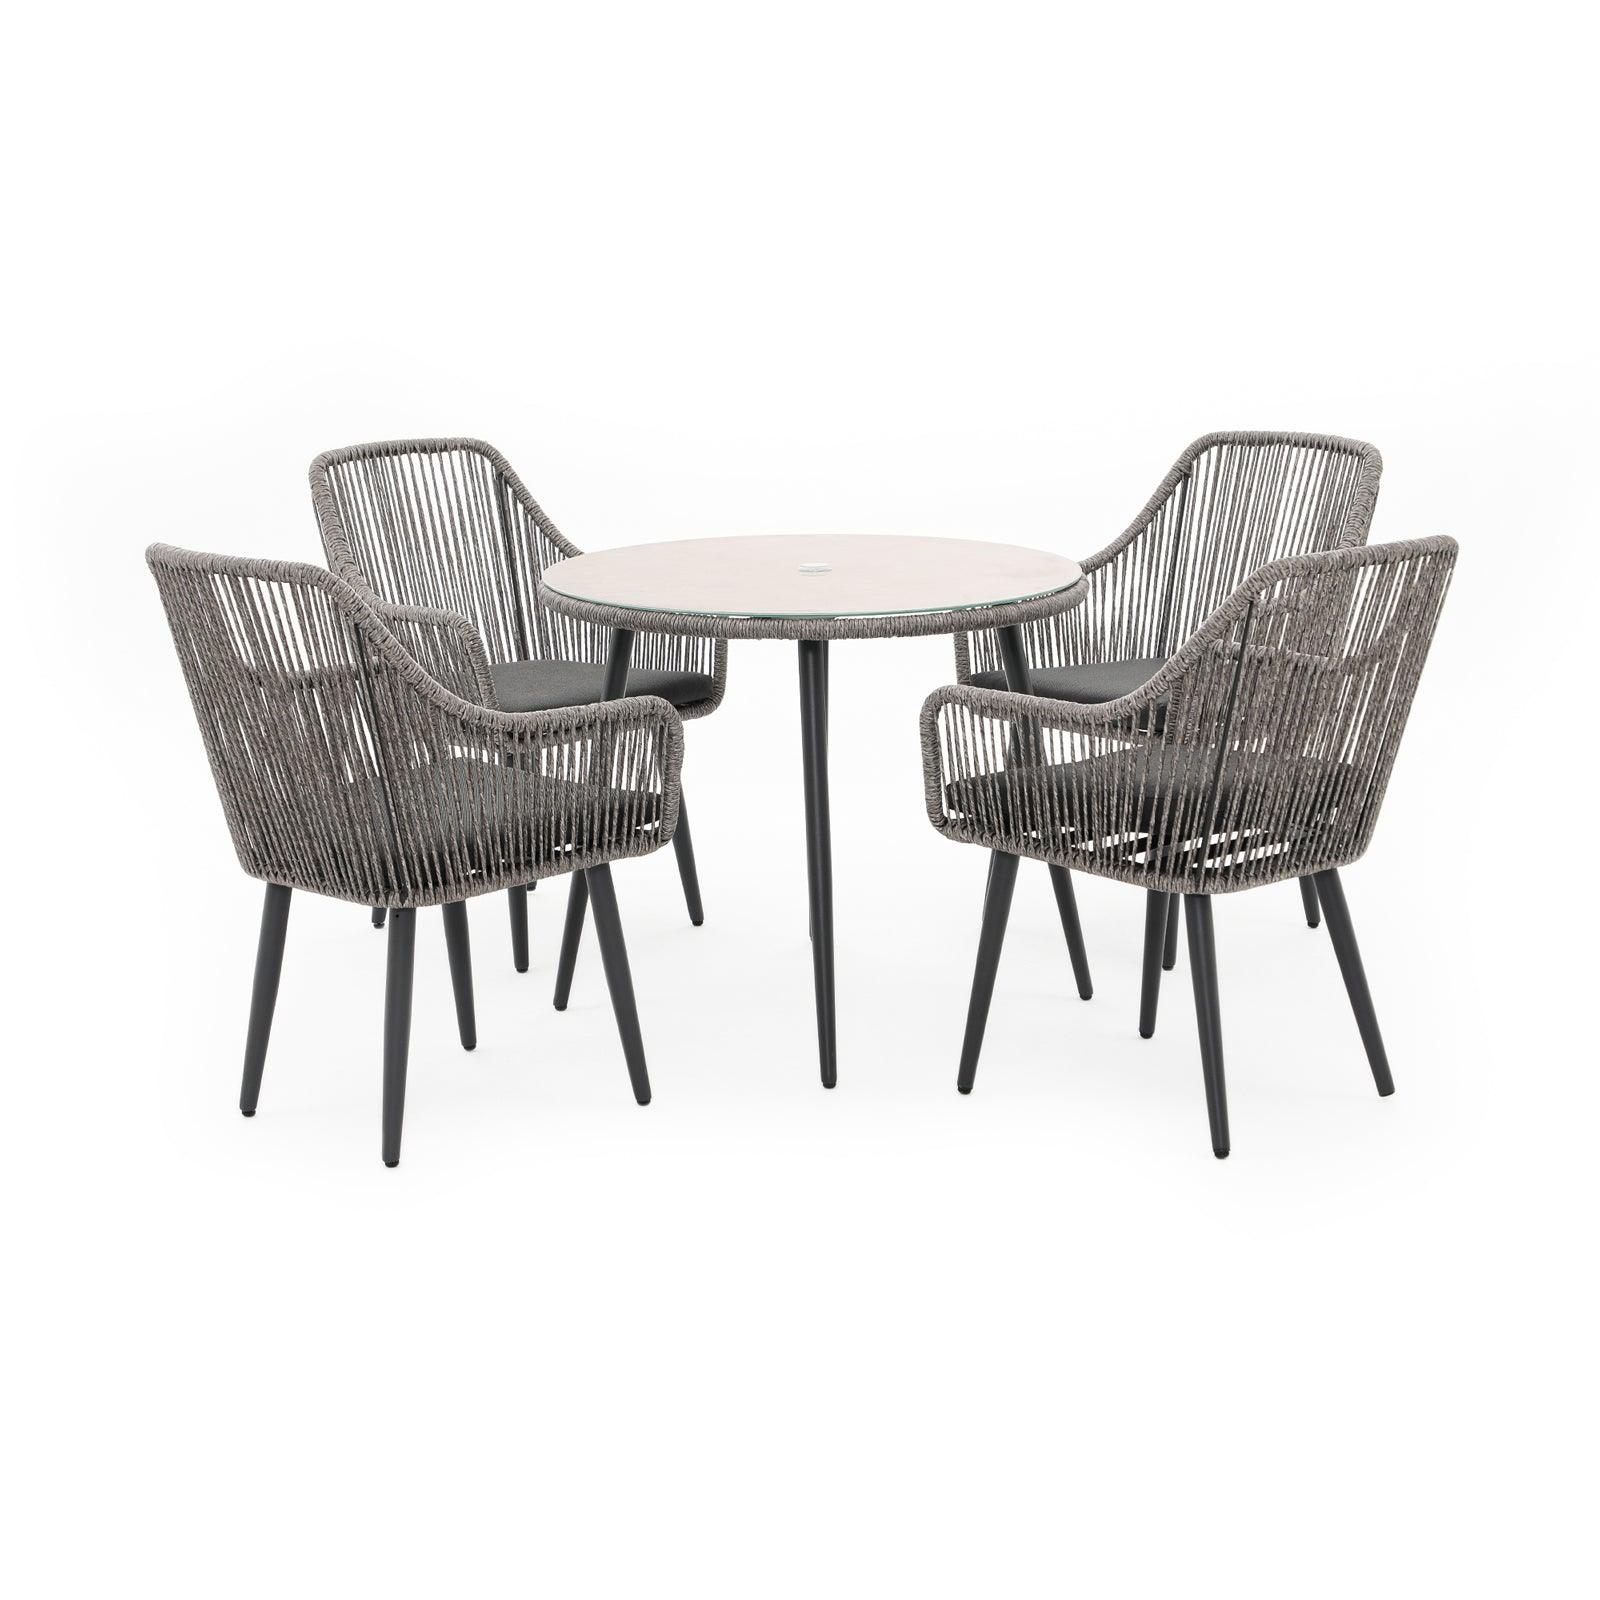 Hallerbos grey wicker outdoor Dining Set for 4 with steel frame, dark grey cushions; 1 Round Dining Table with umbrella hole, 4 dining chairs- Jardina Furniture#Color_Grey